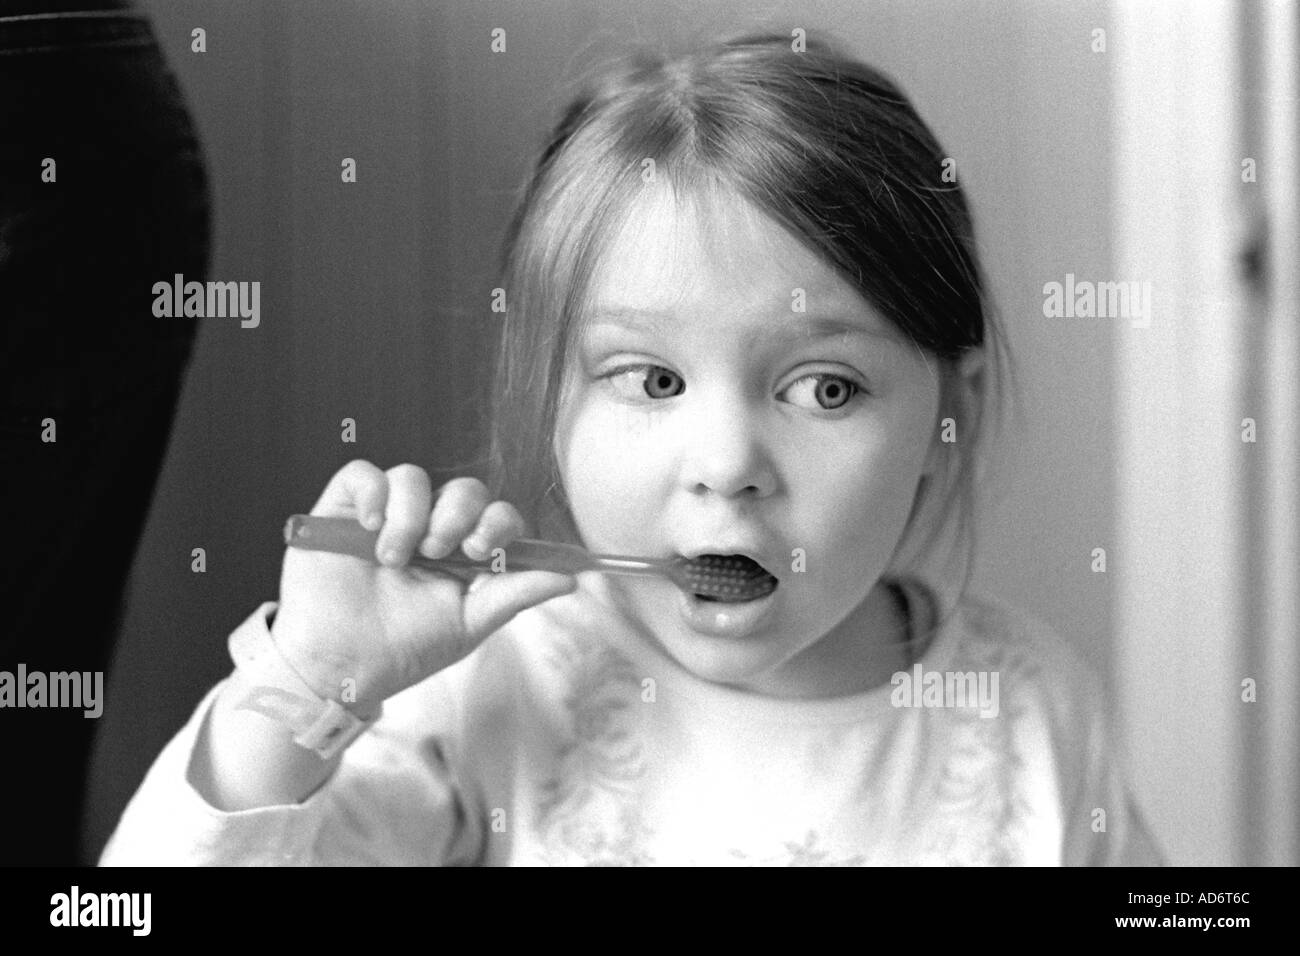 A child brushes her teeth Stock Photo